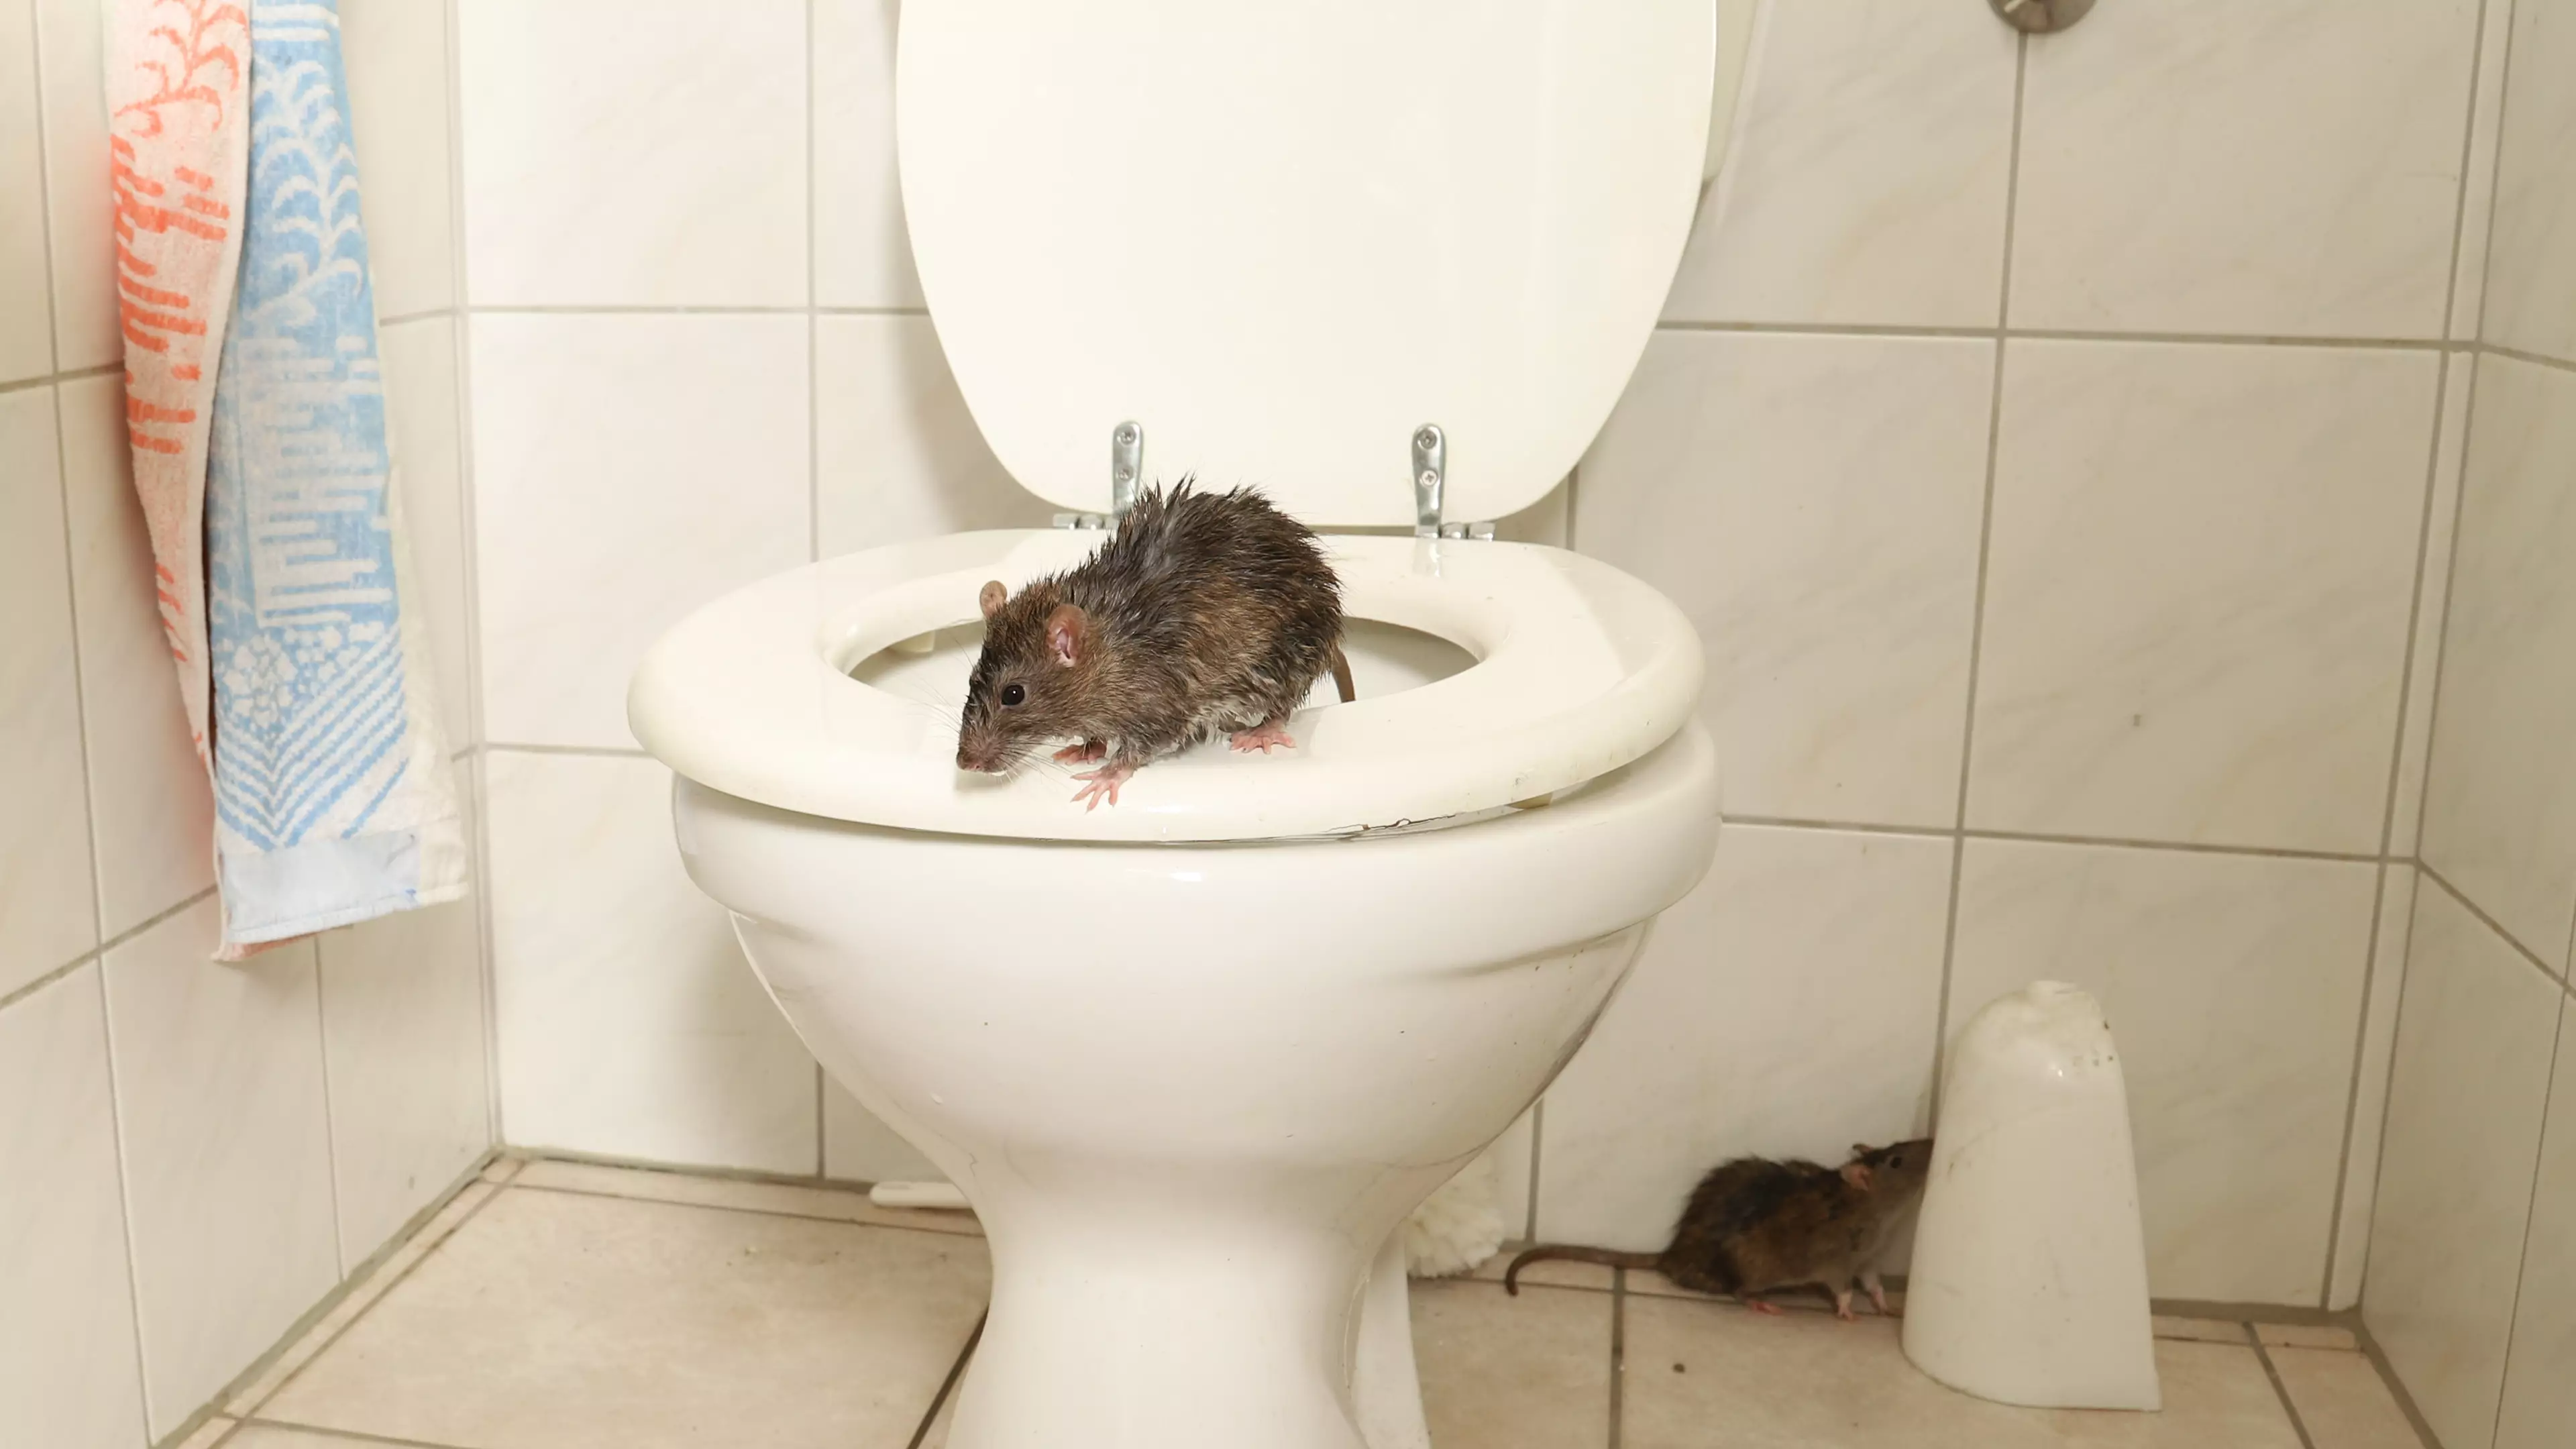 Plague Of Rats Are Invading UK Homes Through Toilets And Letterboxes